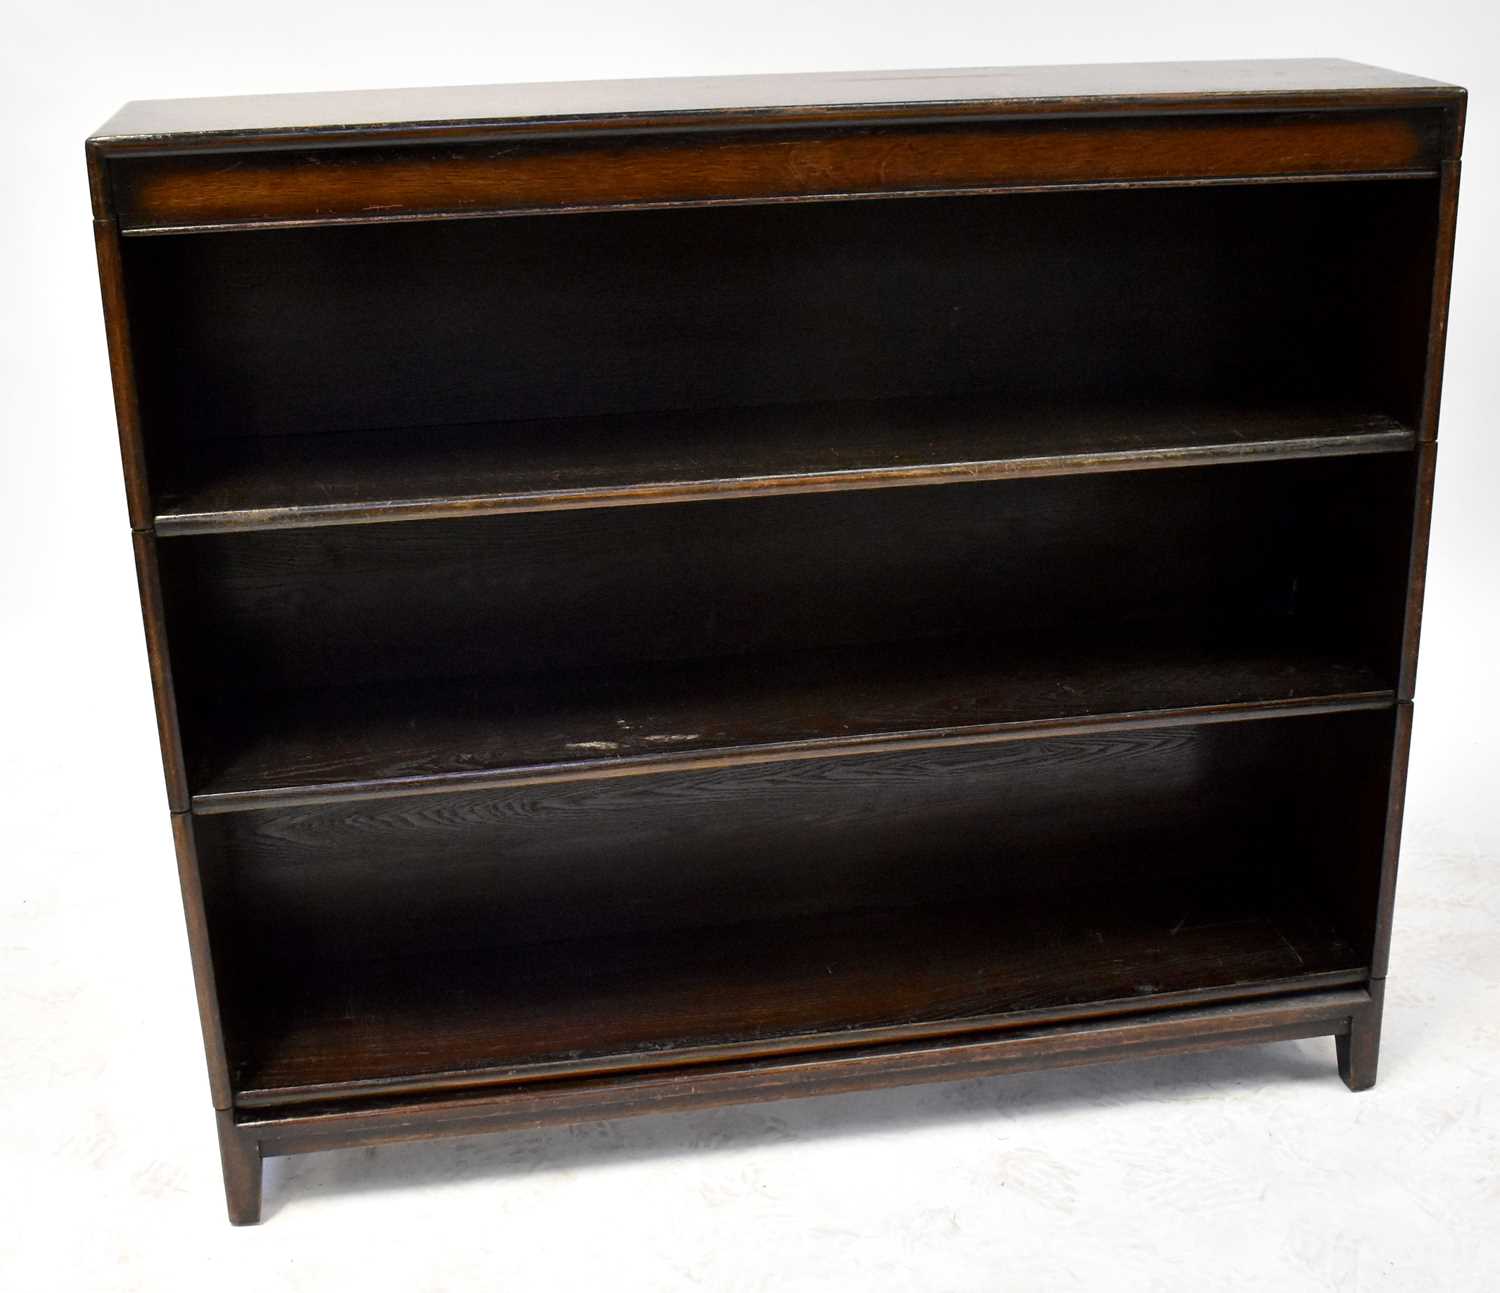 HUNTER & CO, MANCHESTER; a mid-20th century oak stacking open bookcase, approx. 80 x 128 x 28cm.80 x